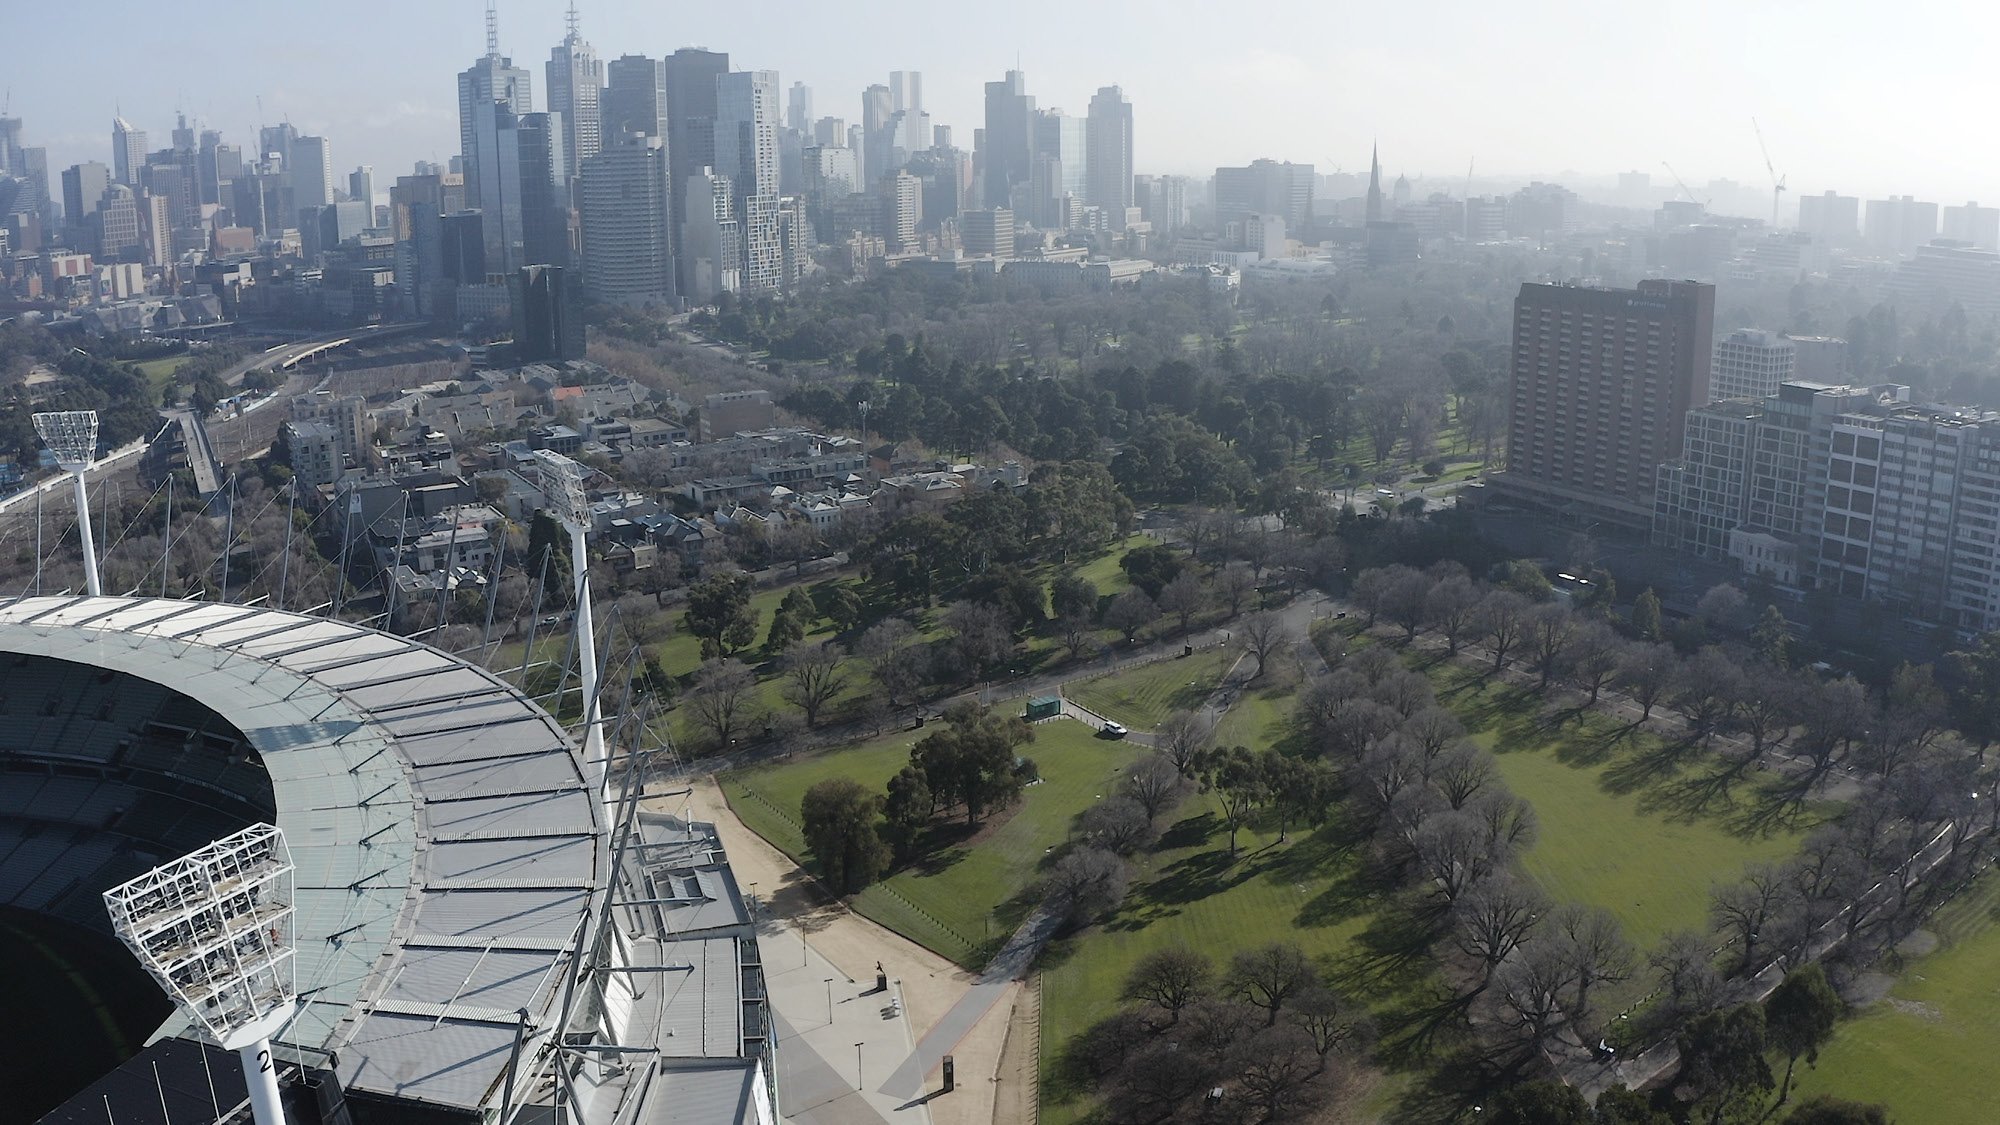 Aerial view over a Melbourne city with a grass field with two glass buildings in the foreground